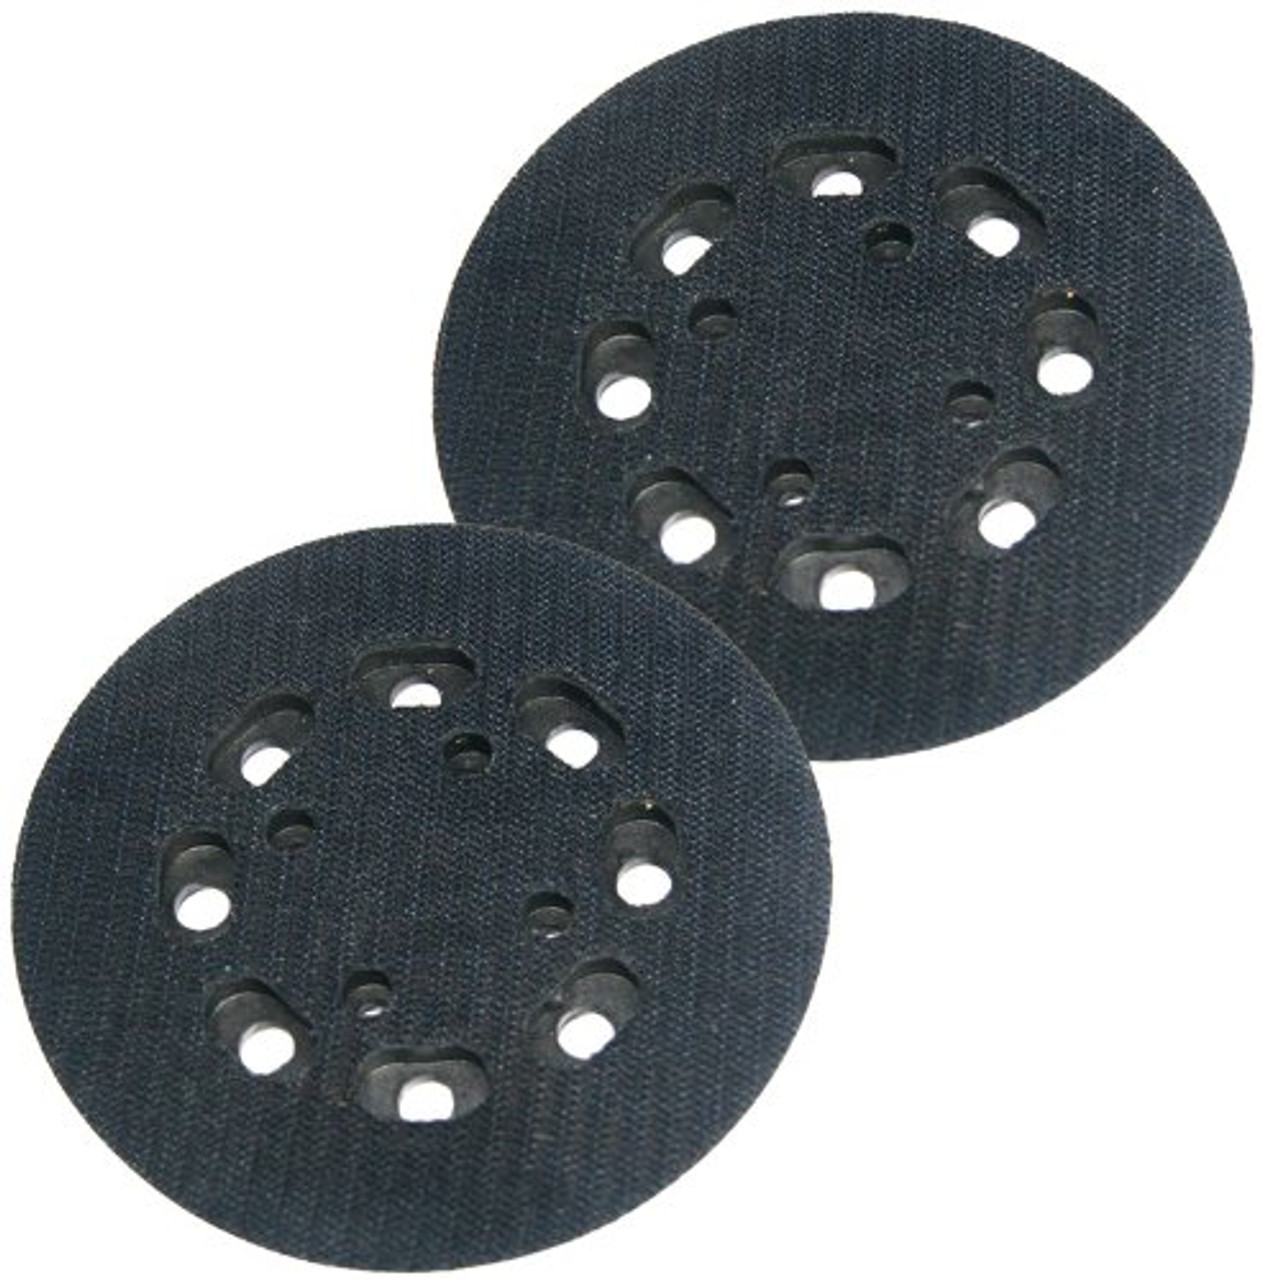 Black and Decker OEM Backing Pads # 587295-01-2PK